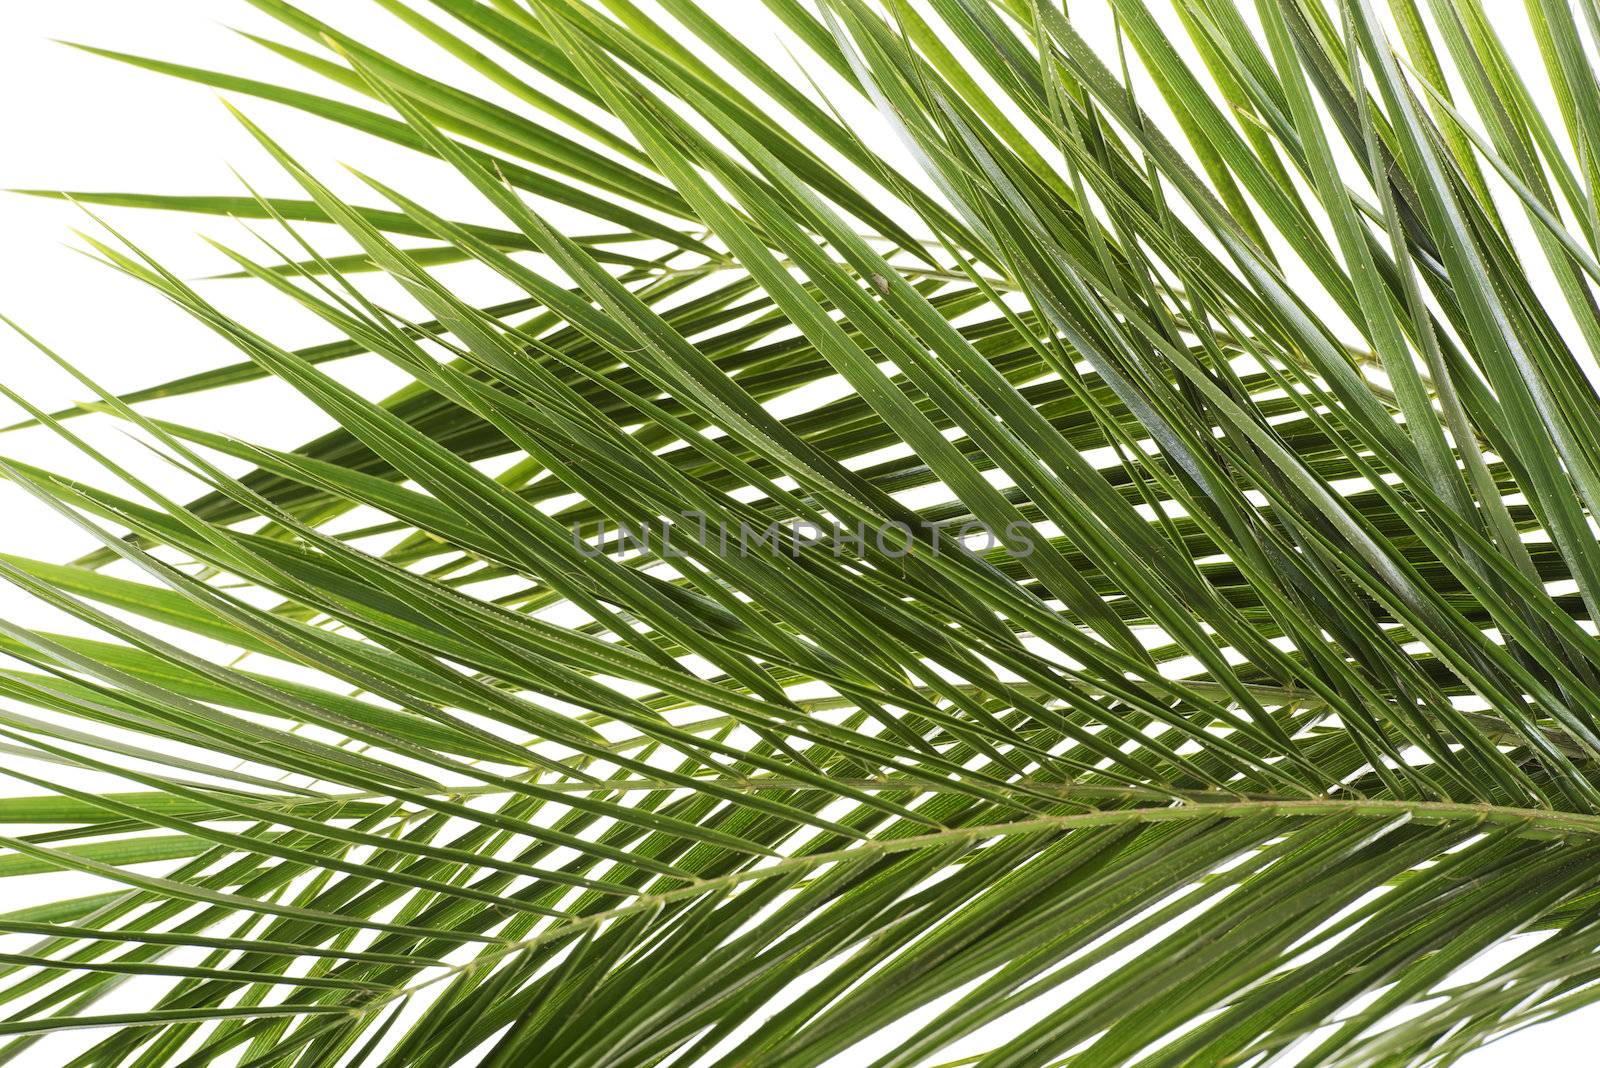 Leaves of palm tree. Over white background.